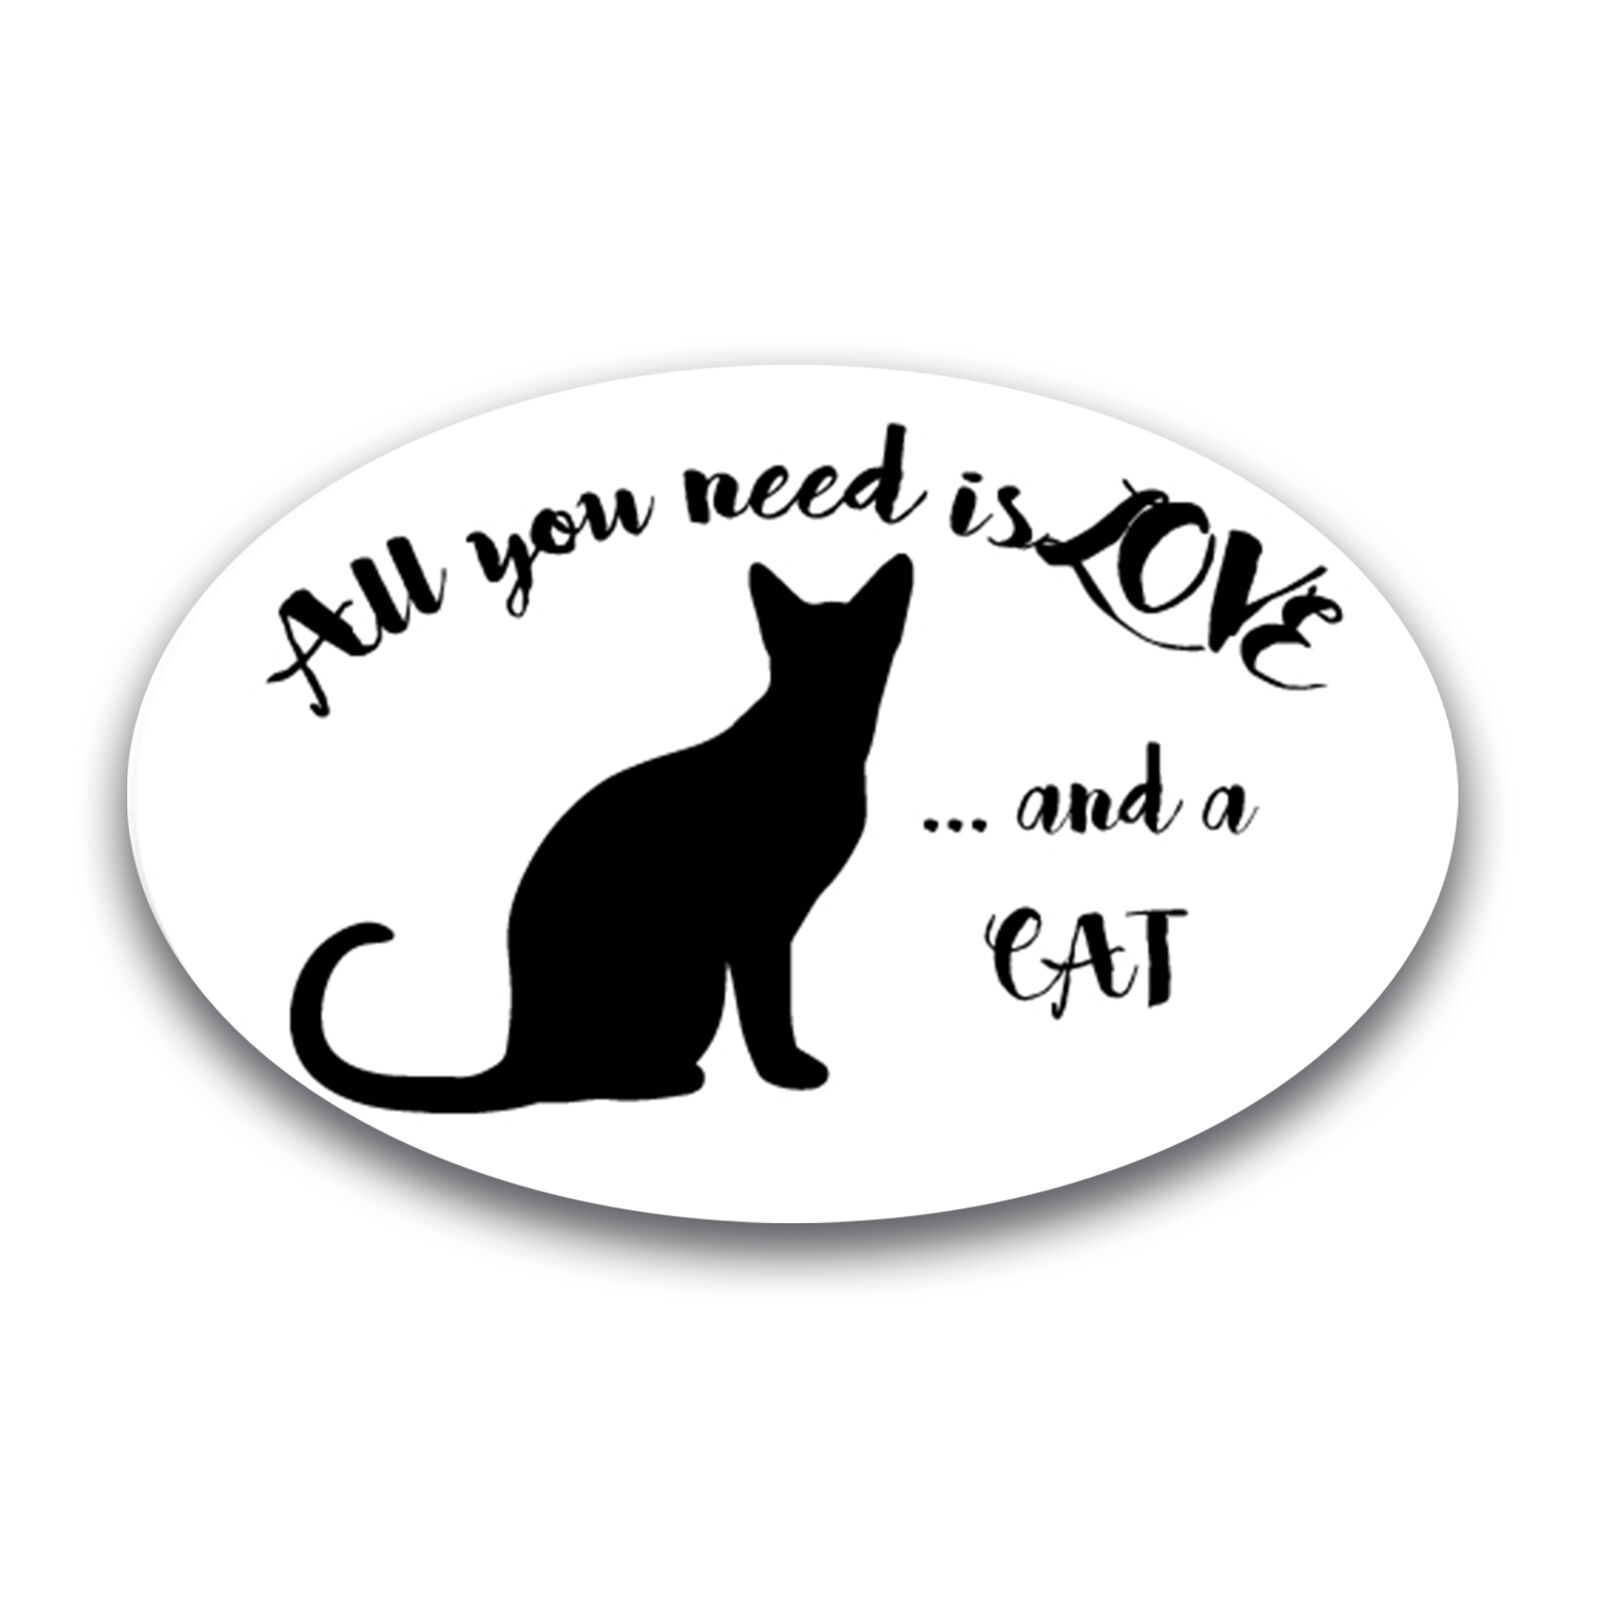 All You Need is Love and a Cat Oval Magnet Decal, 4x6 Inches, Automotive Magnet